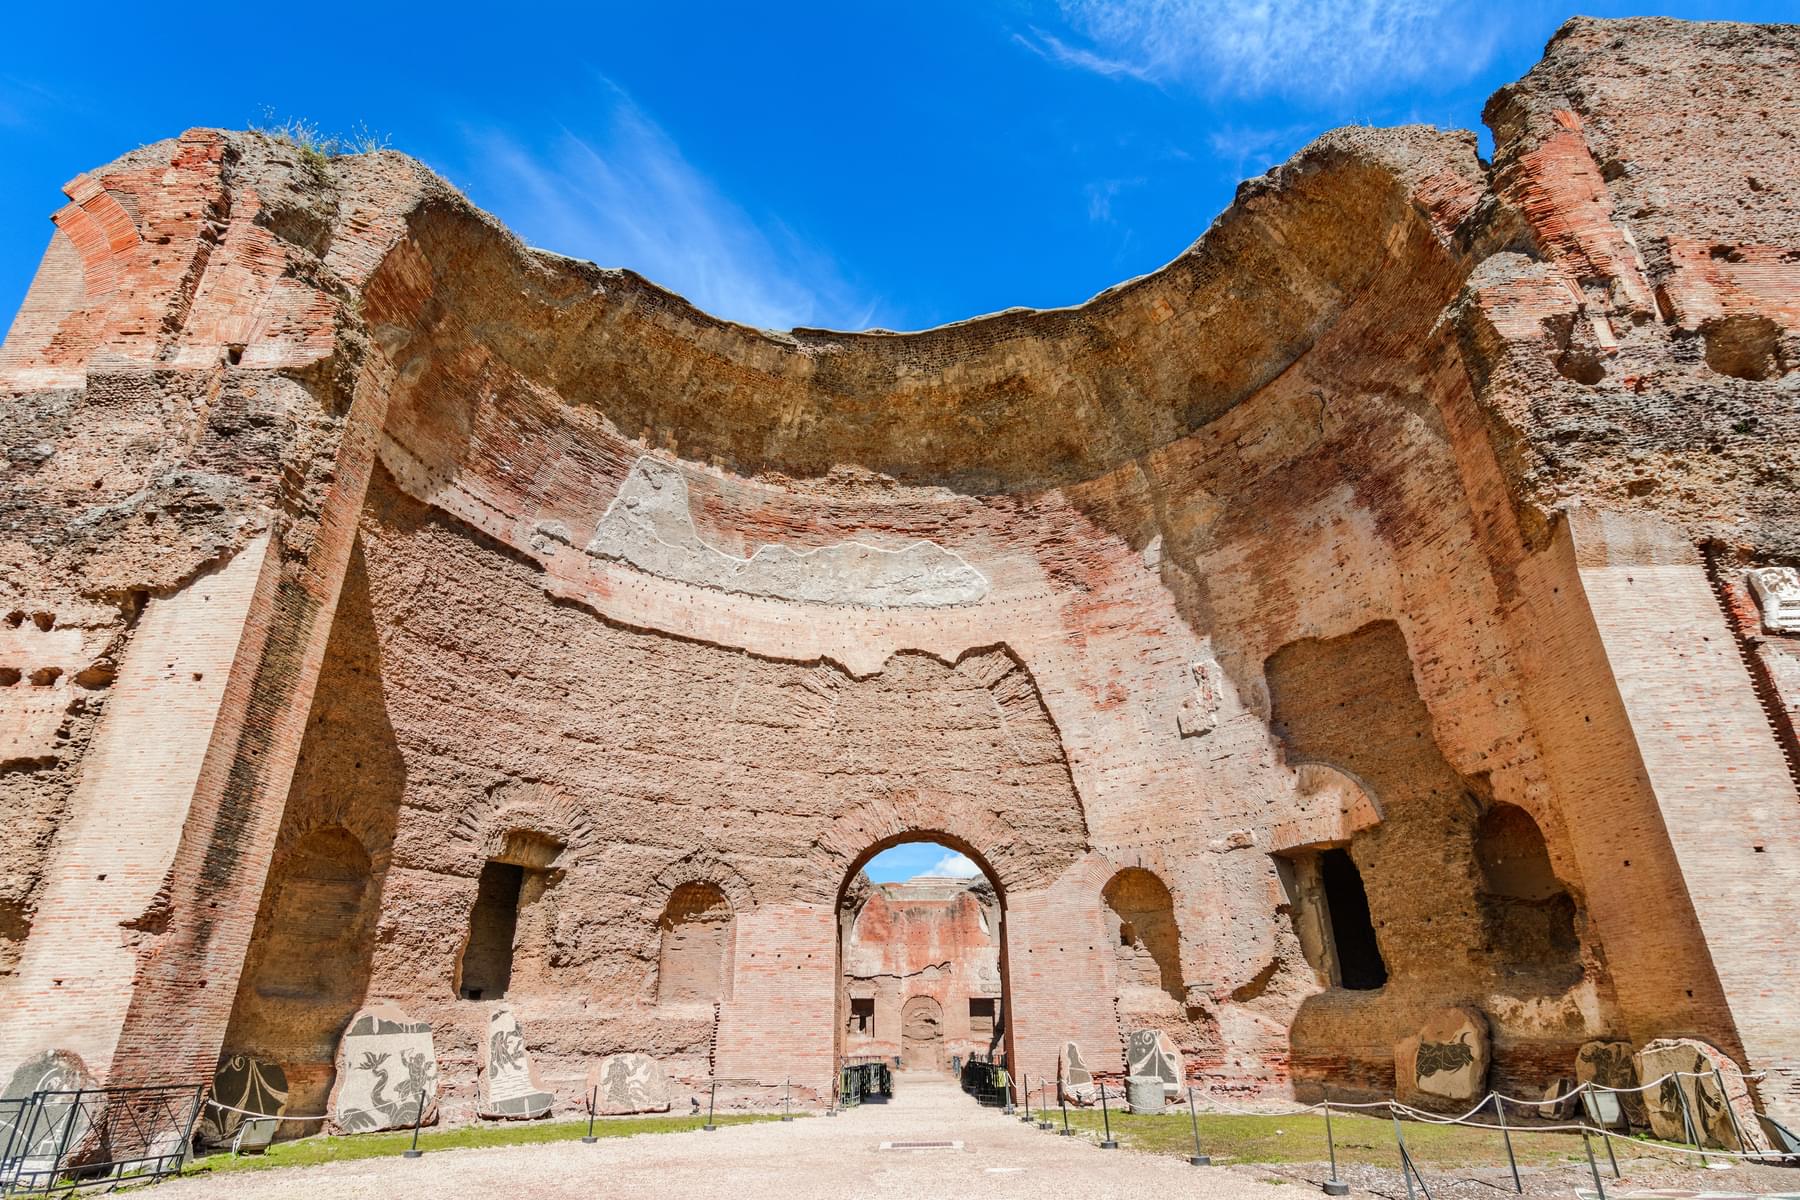 Admire the amazing architecture of the ruins of heliocaminus